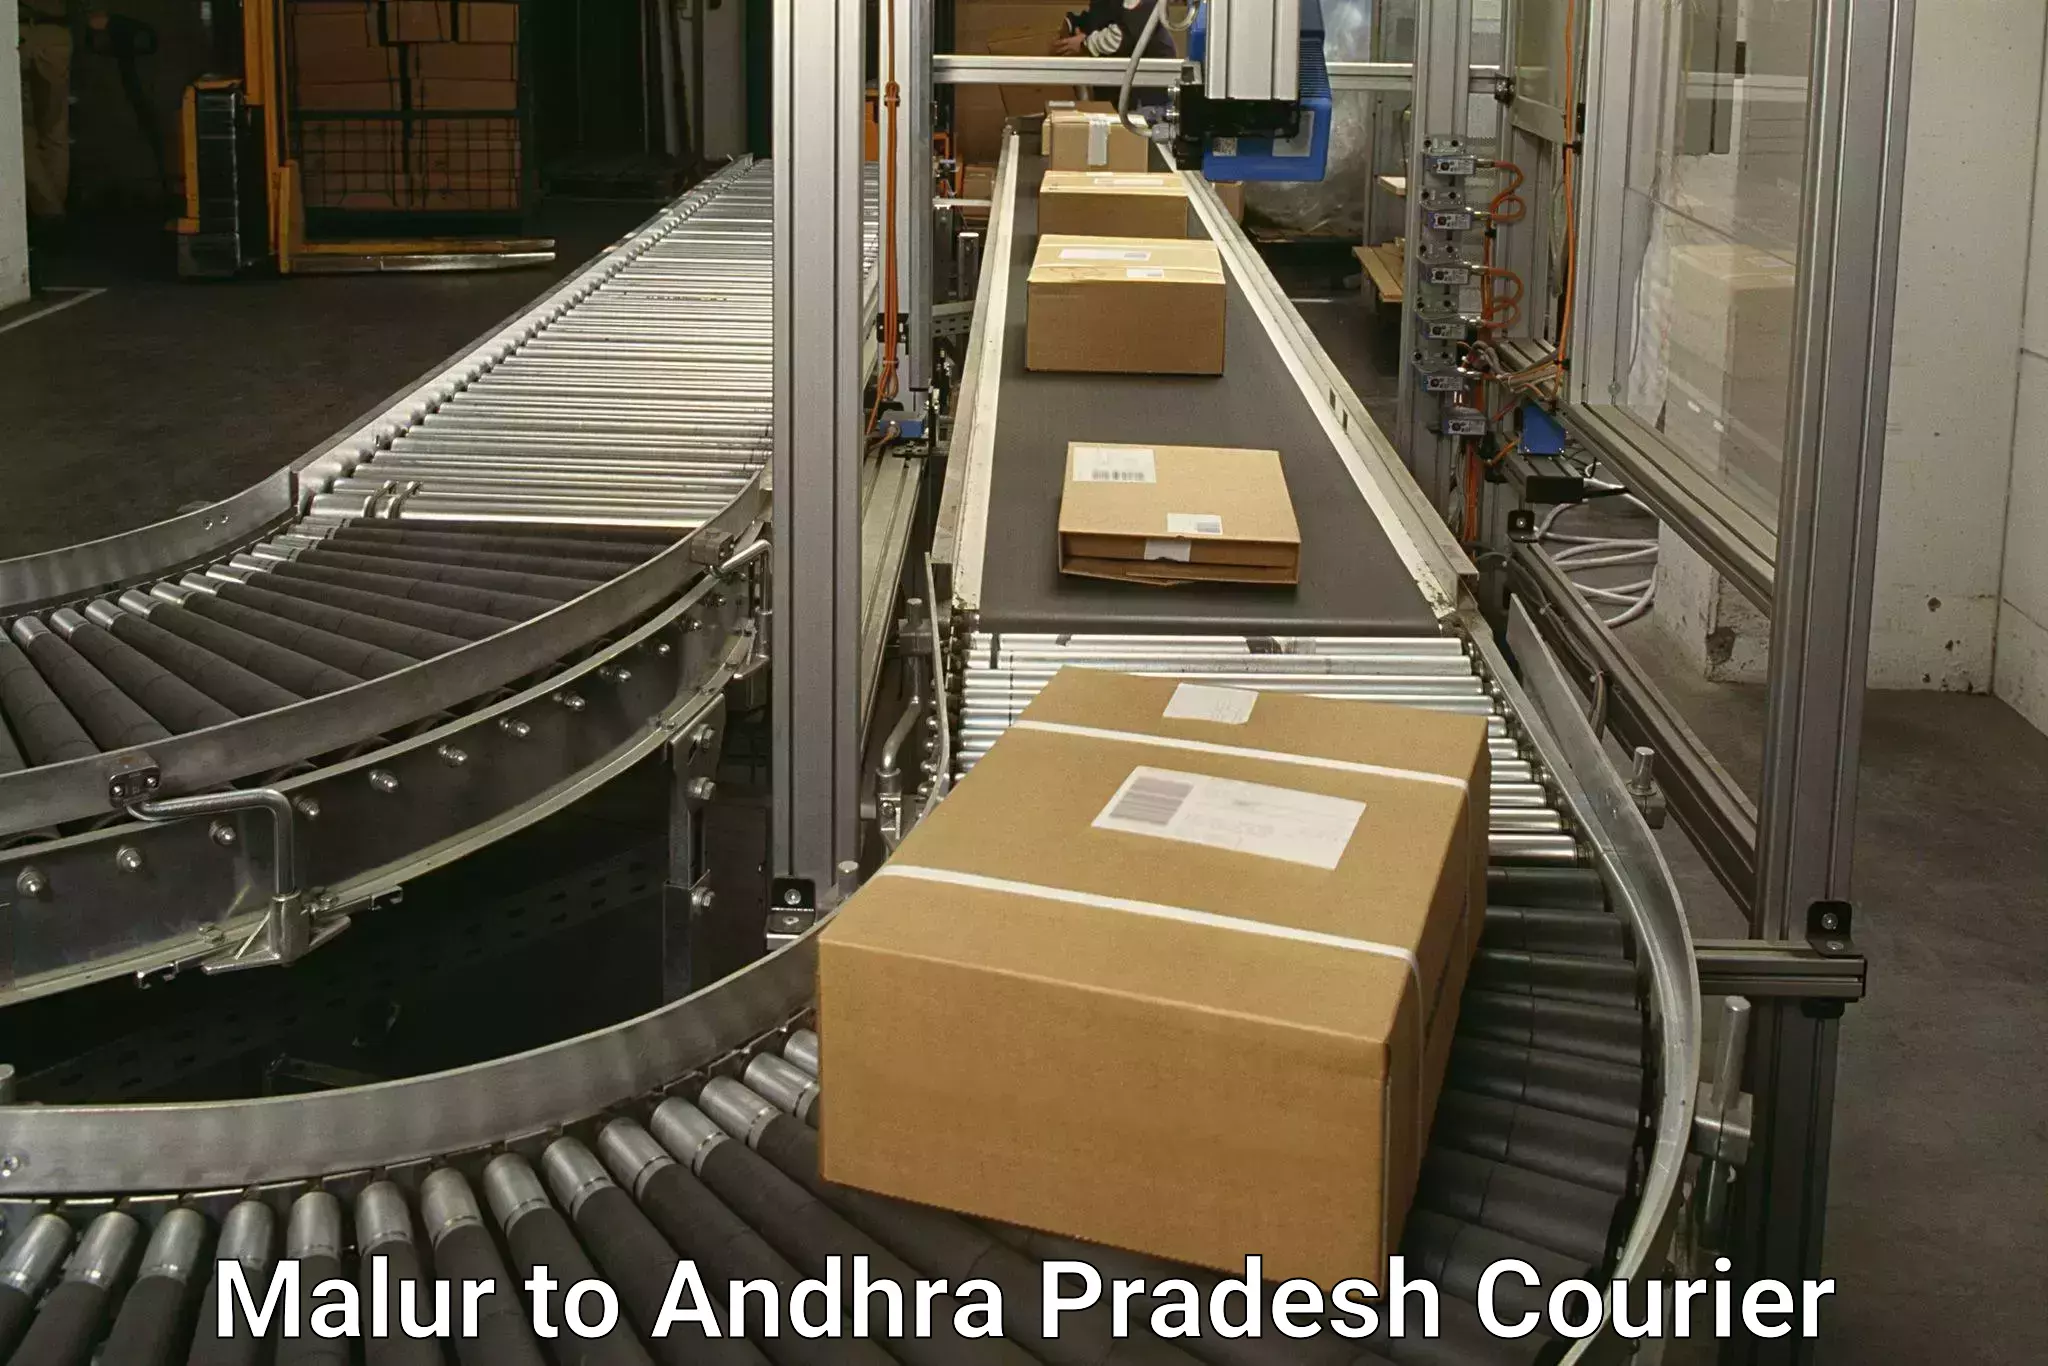 State-of-the-art courier technology Malur to Kavitam